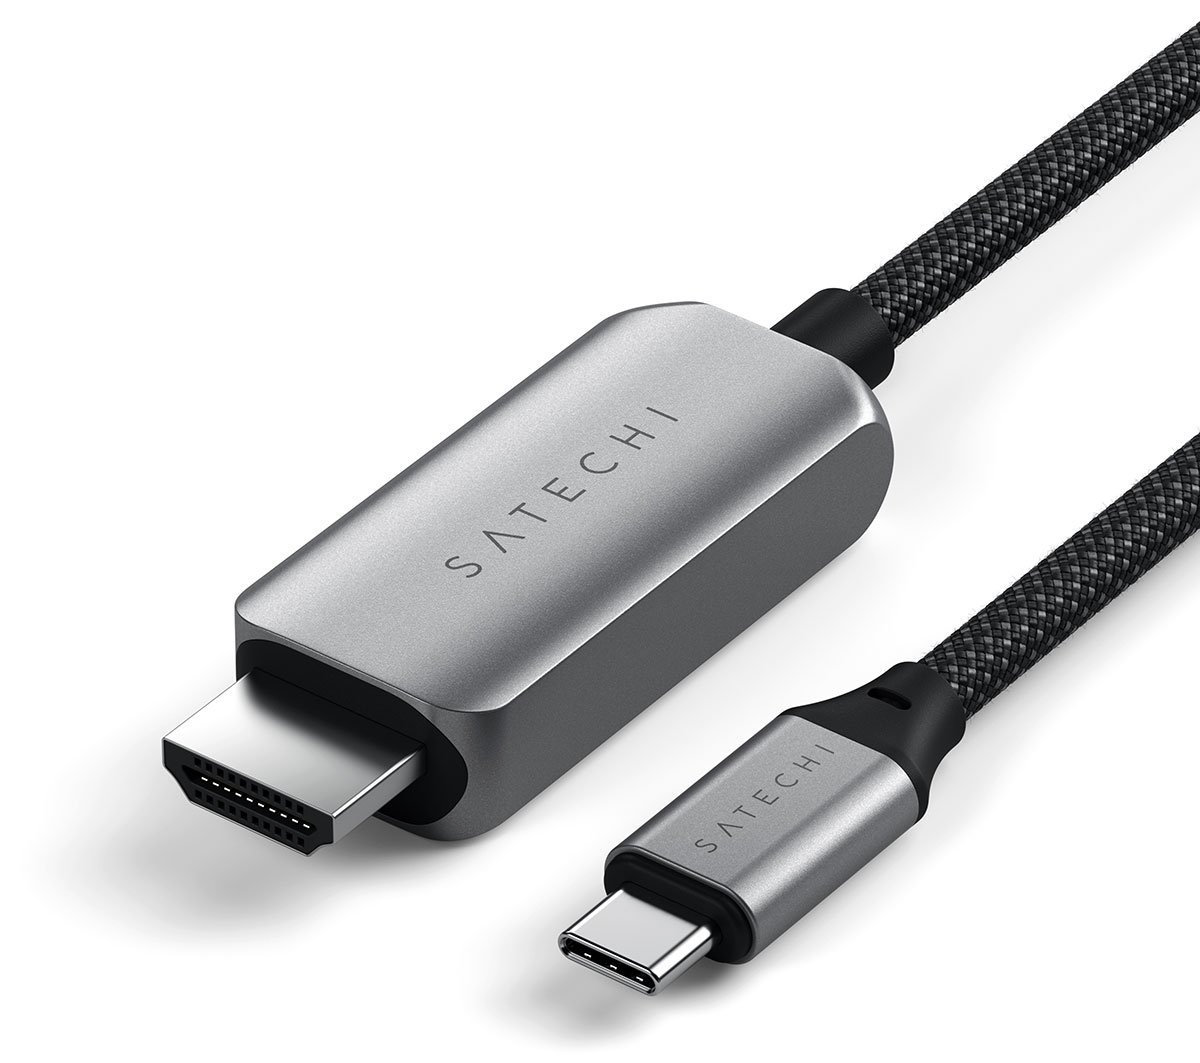 Satechi USB-C To HDMI 2.1 8K Cable - Best 8K USB-C to HDMI 2.1 cable